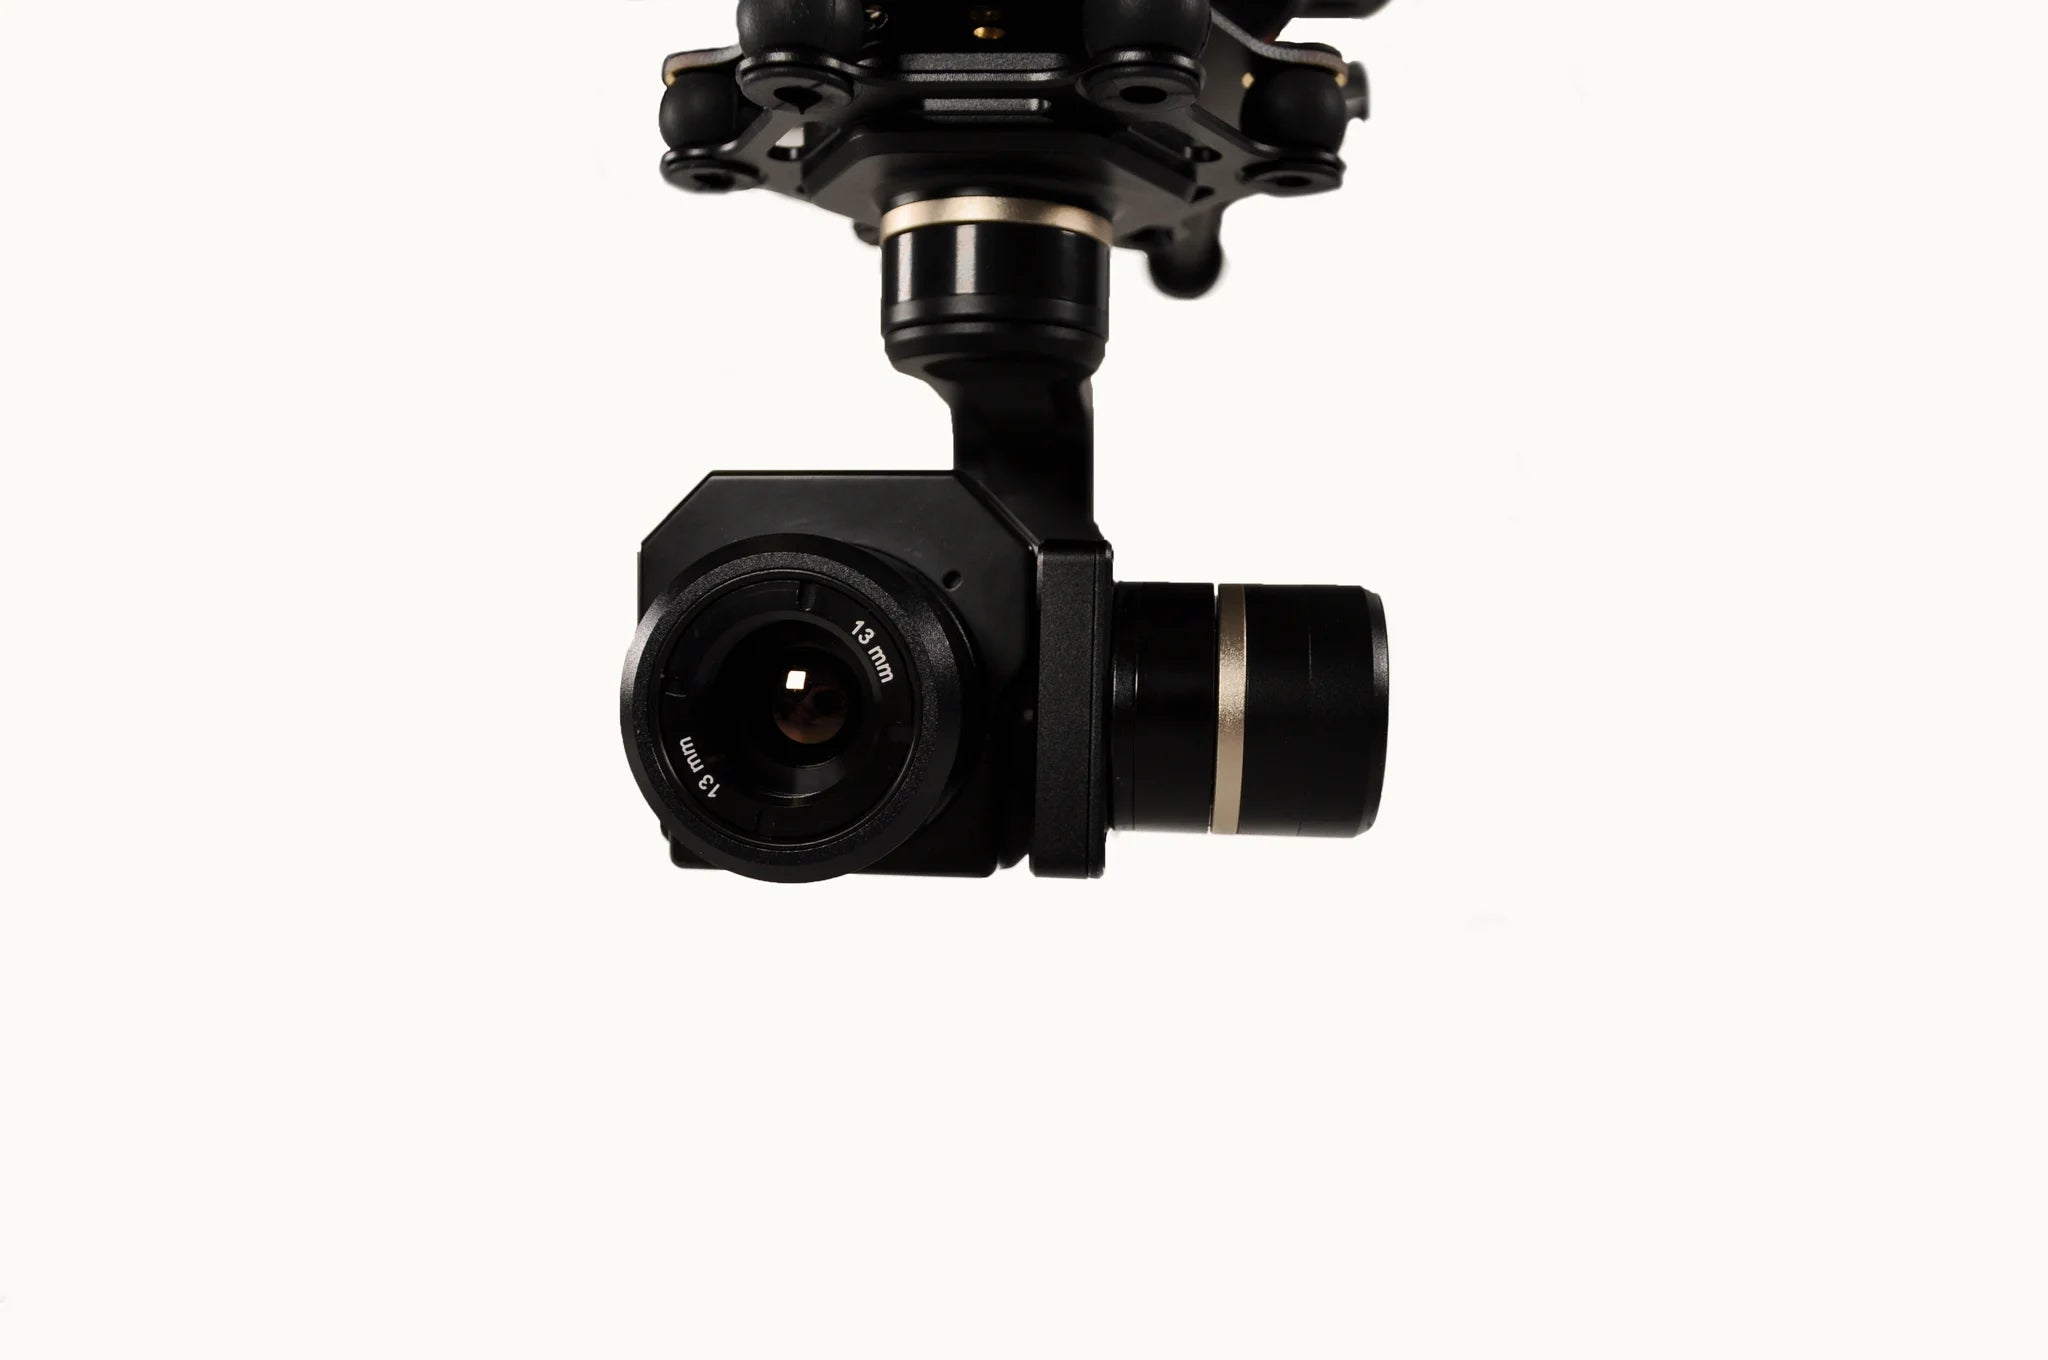 Tarot FLIR 3 Axis Gimbal, gimbal is designed to be used in RC multi-rcopter drones